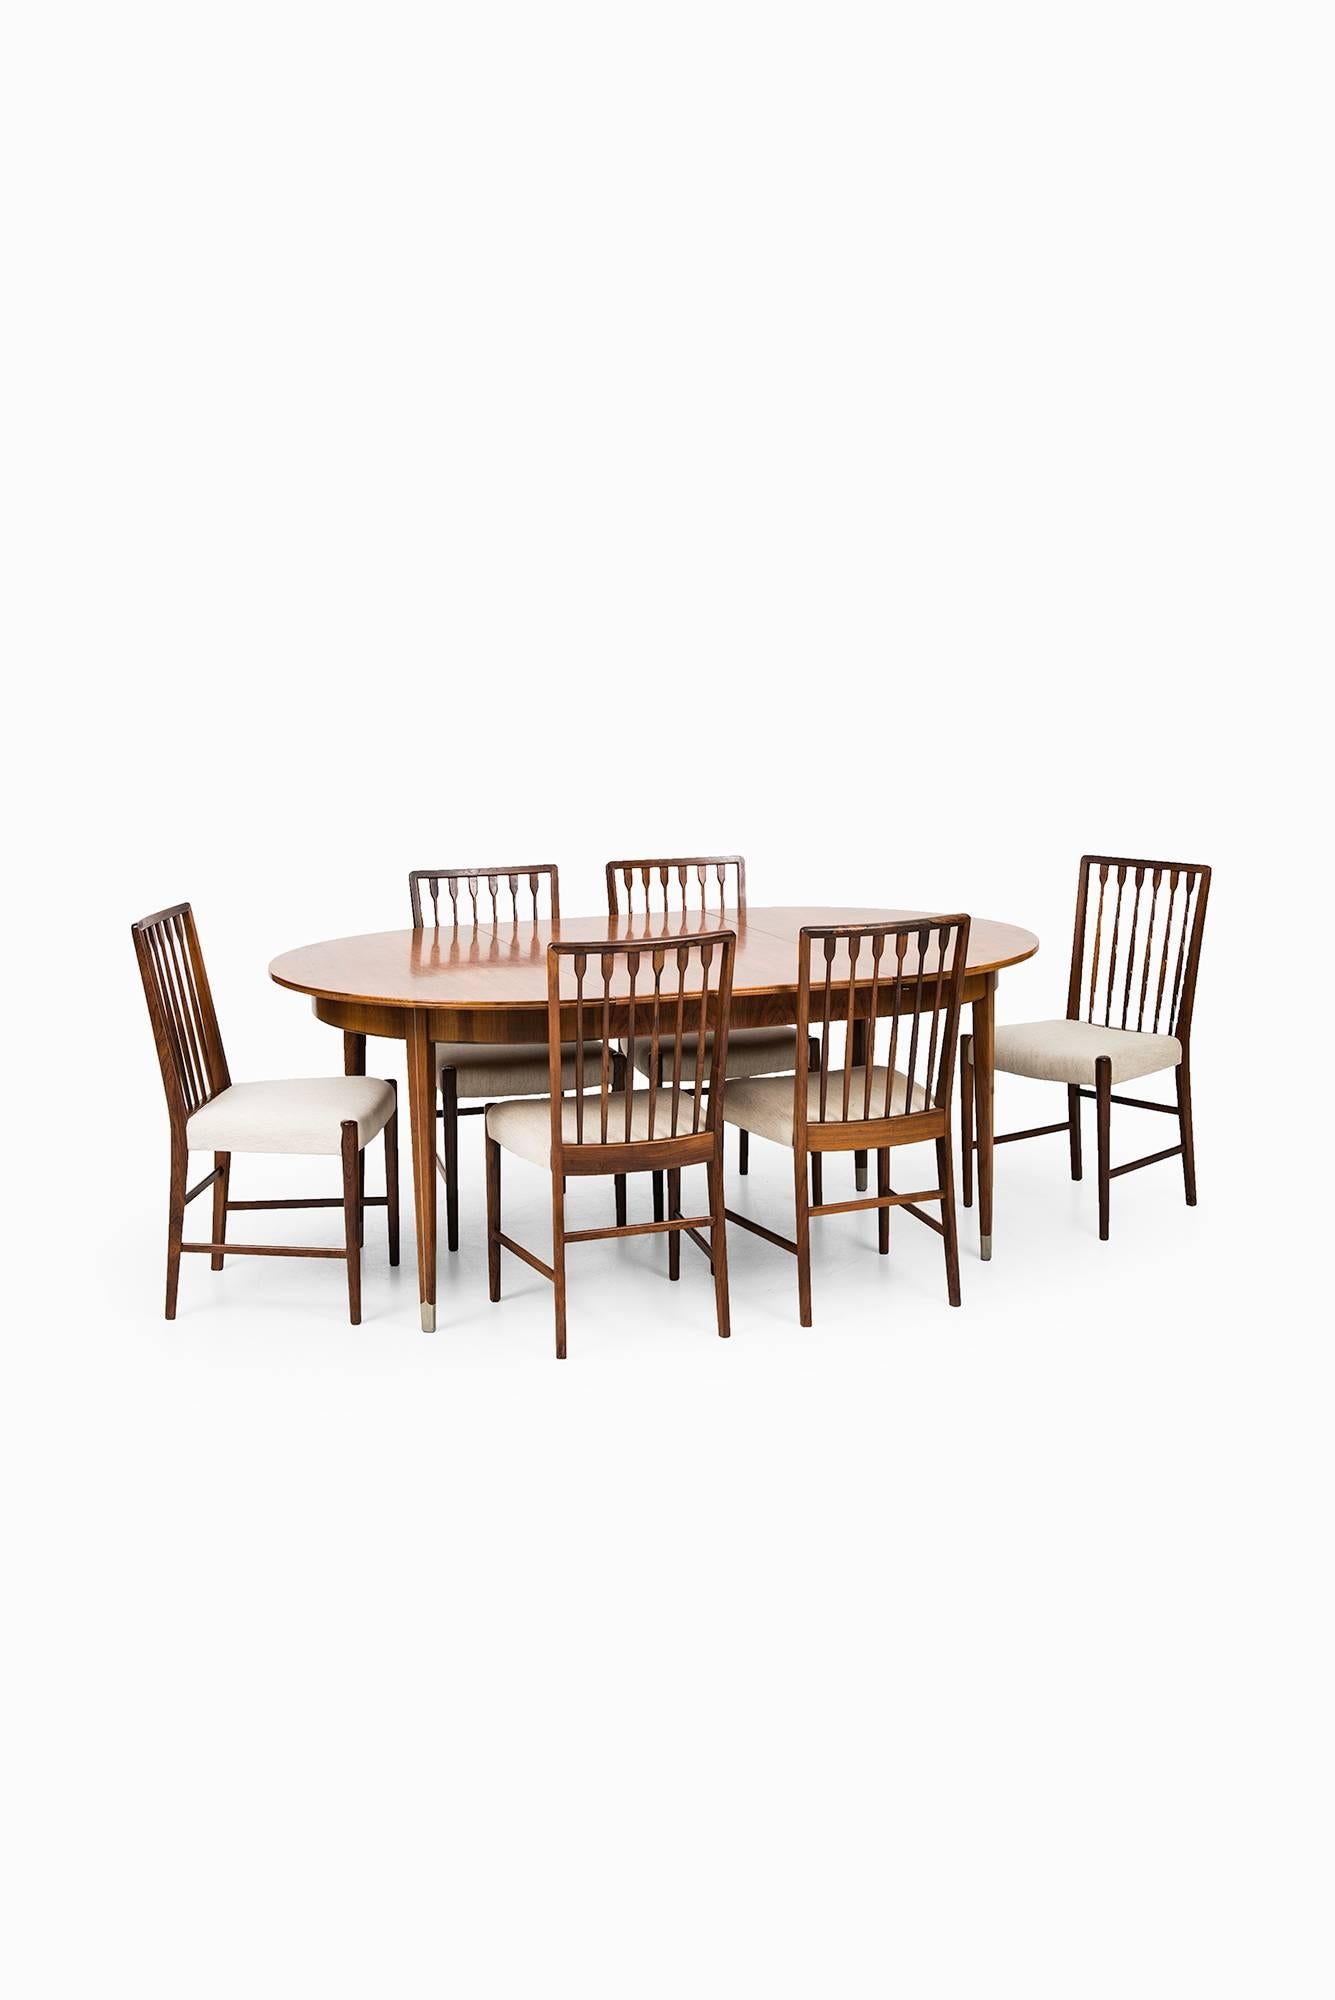 Rare Set of Eight Dining Chairs Designed by Agner Christoffersen in Denmark 1